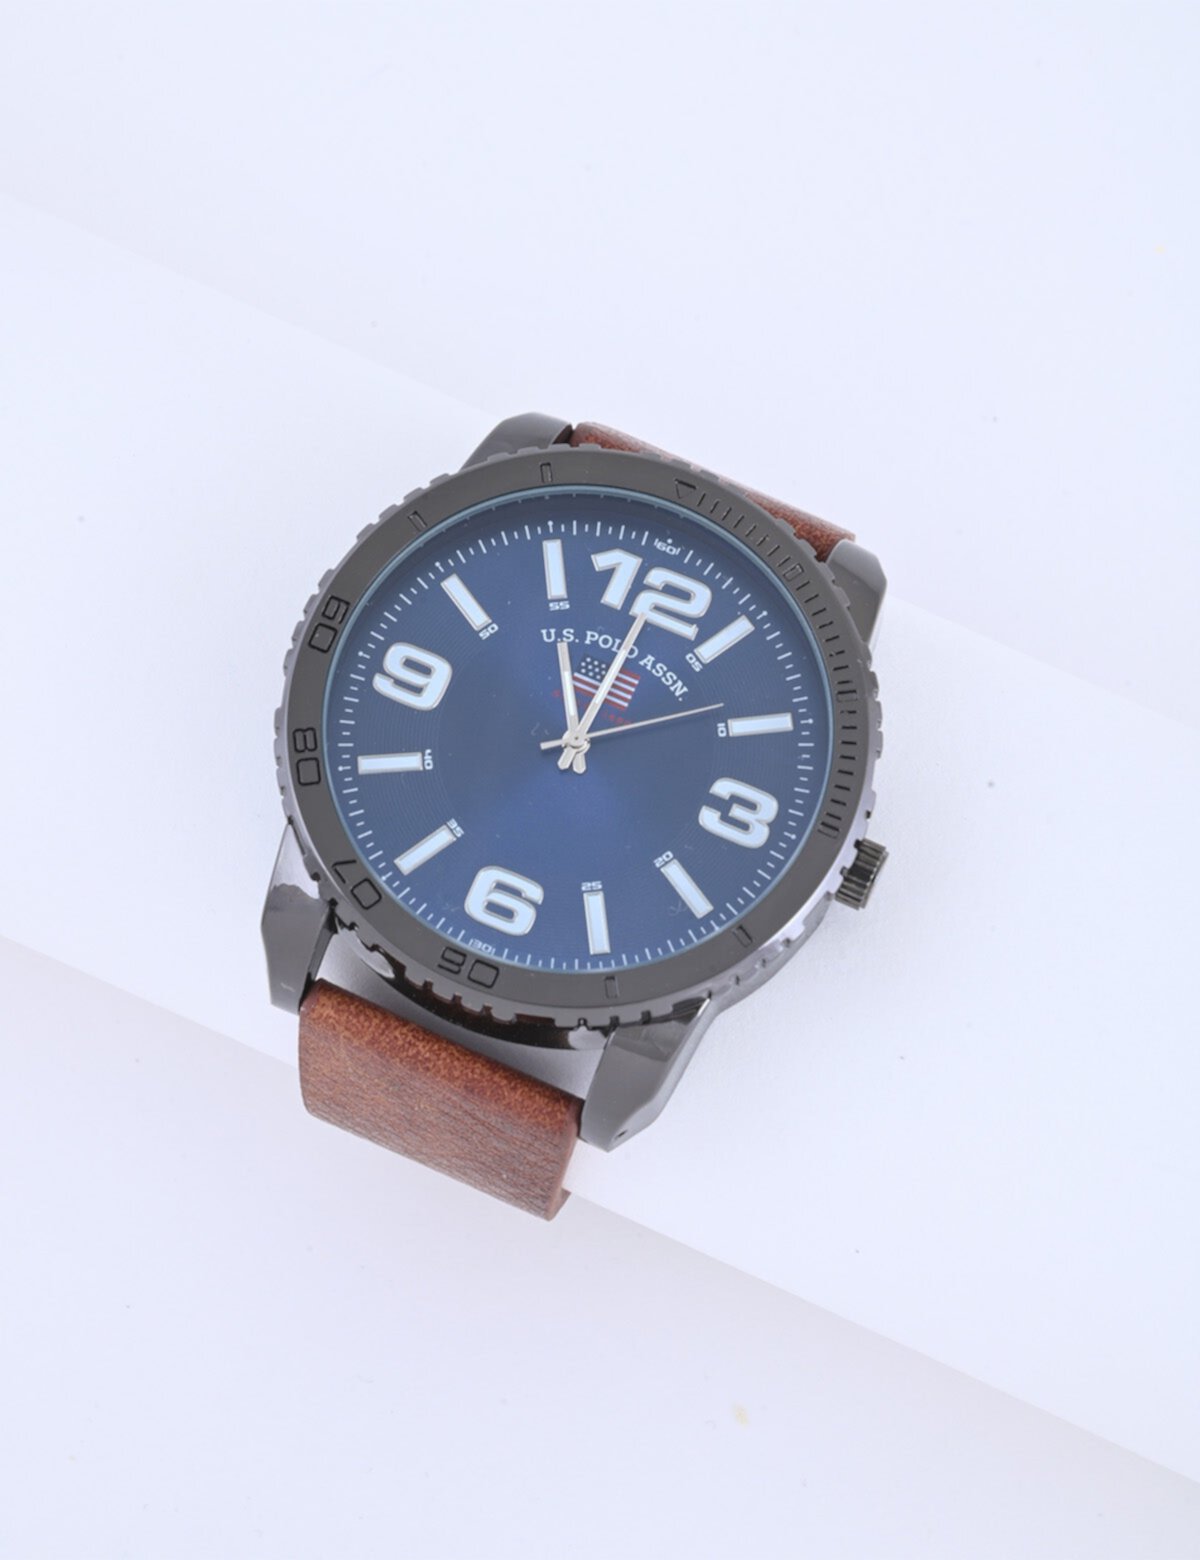 MEN'S BLUE FACE AND BROWN STRAP ANALOG WATCH U.S. POLO ASSN.